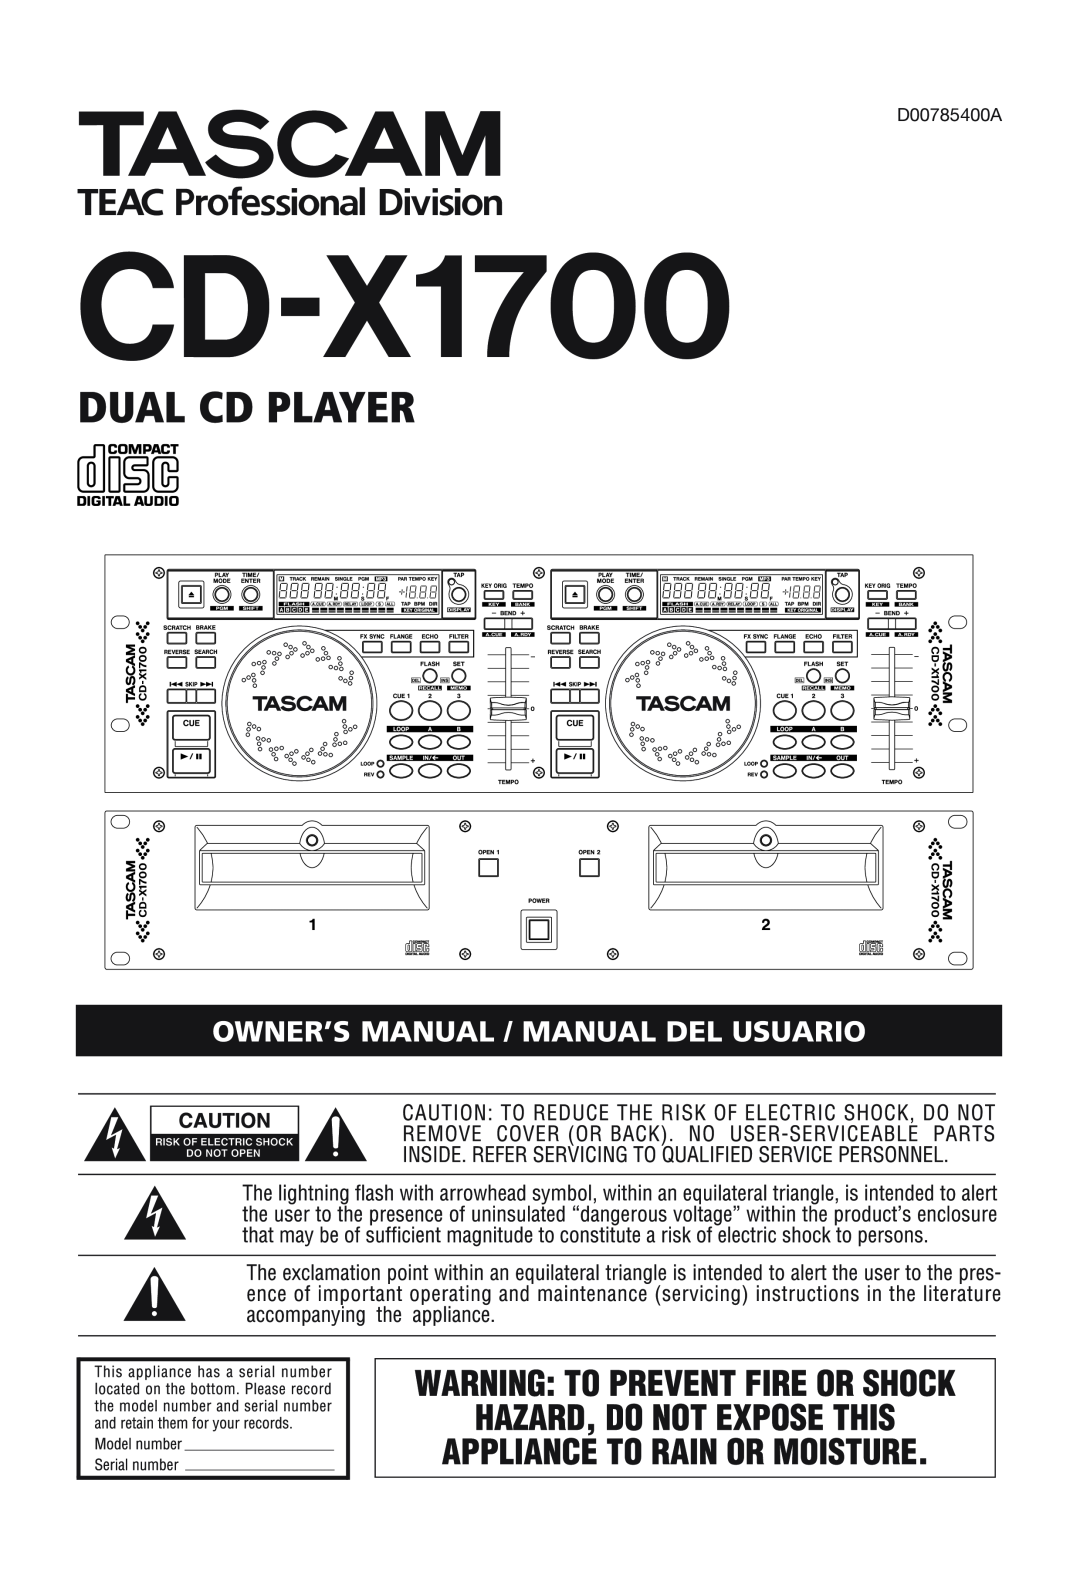 Tascam CD-X1700 owner manual Dual Cd Player, D00785400A 